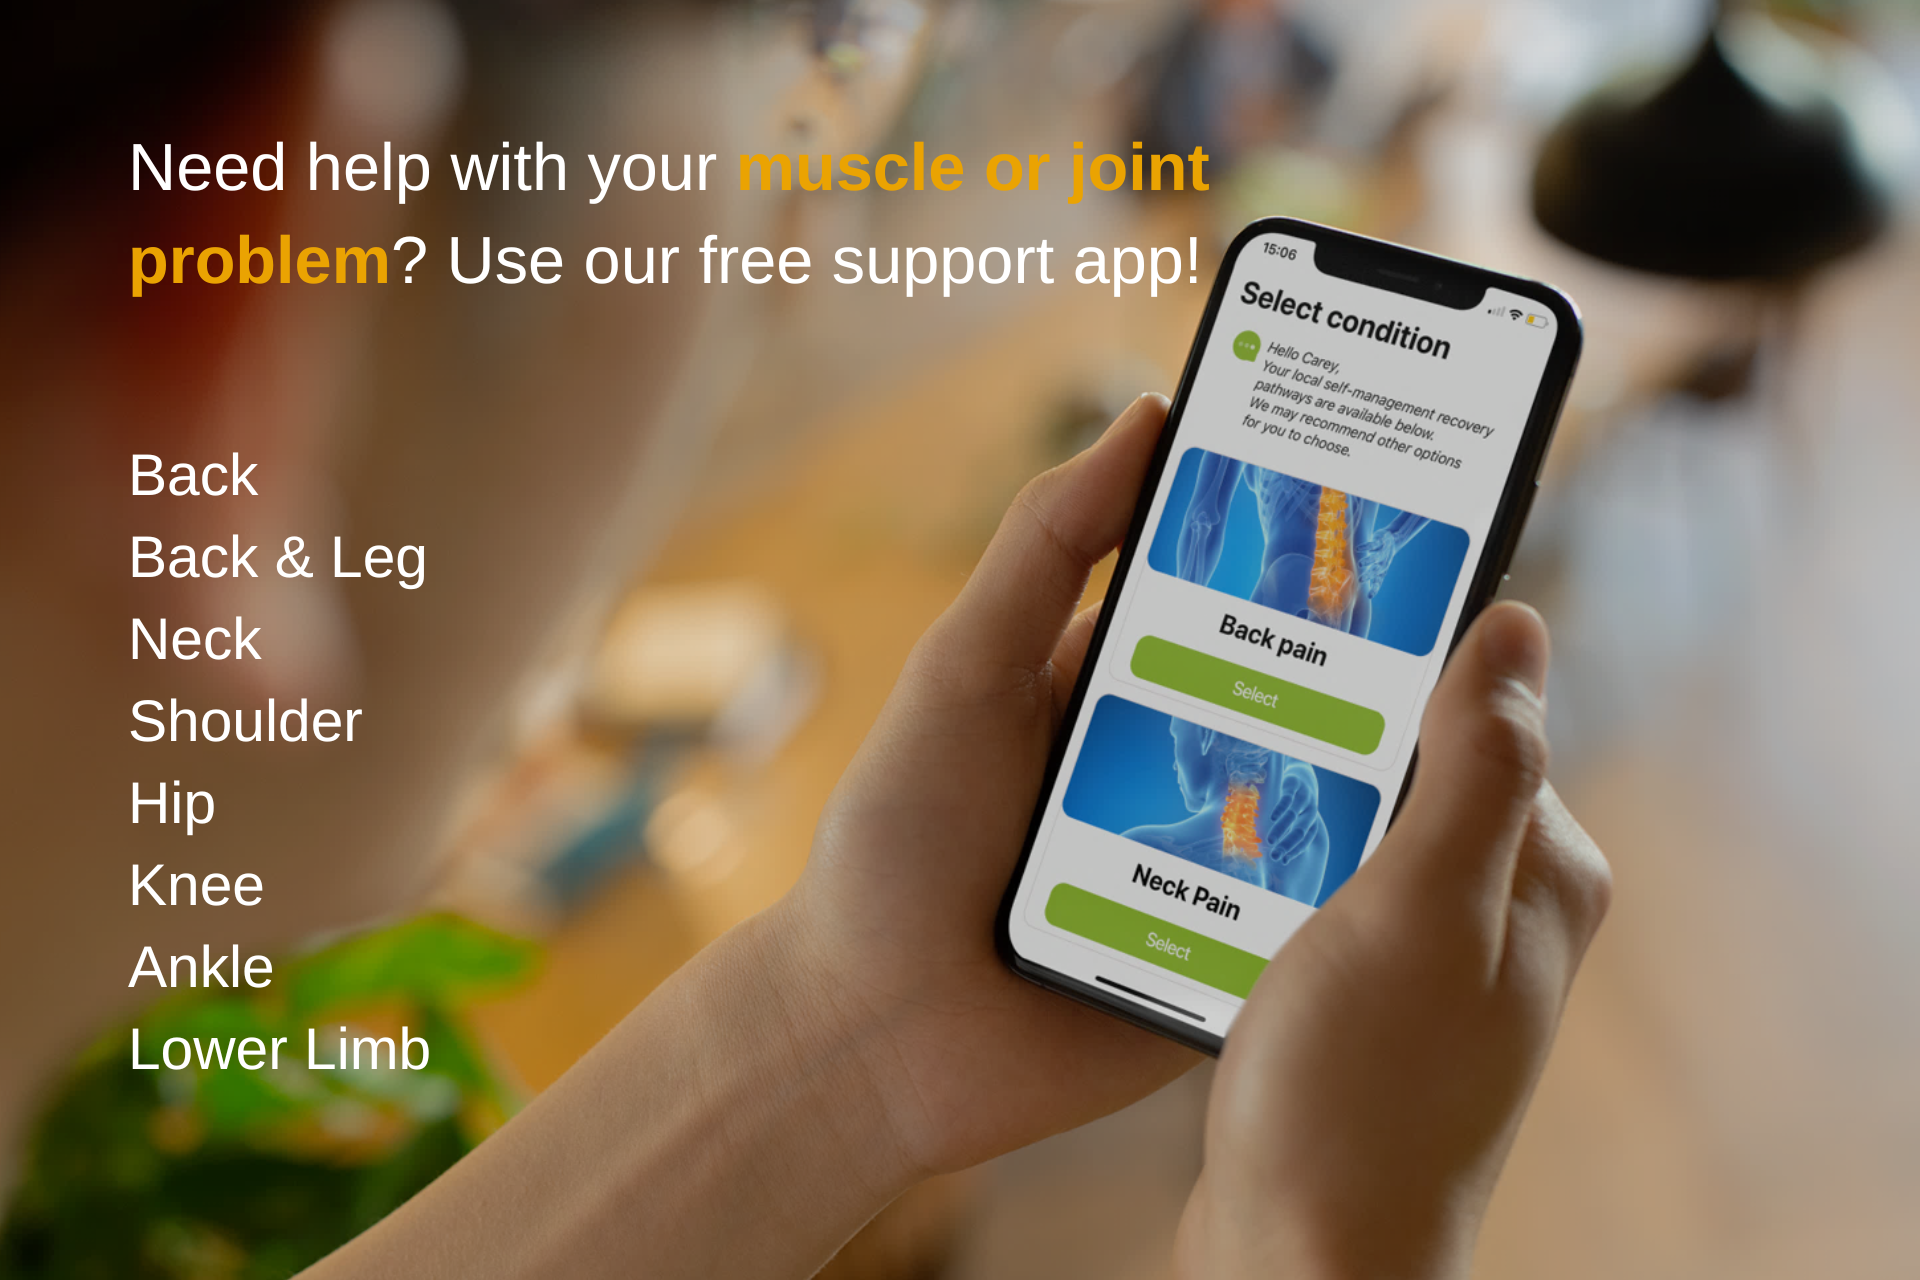 Need help with your muscle or joint problem? Use our free support app!